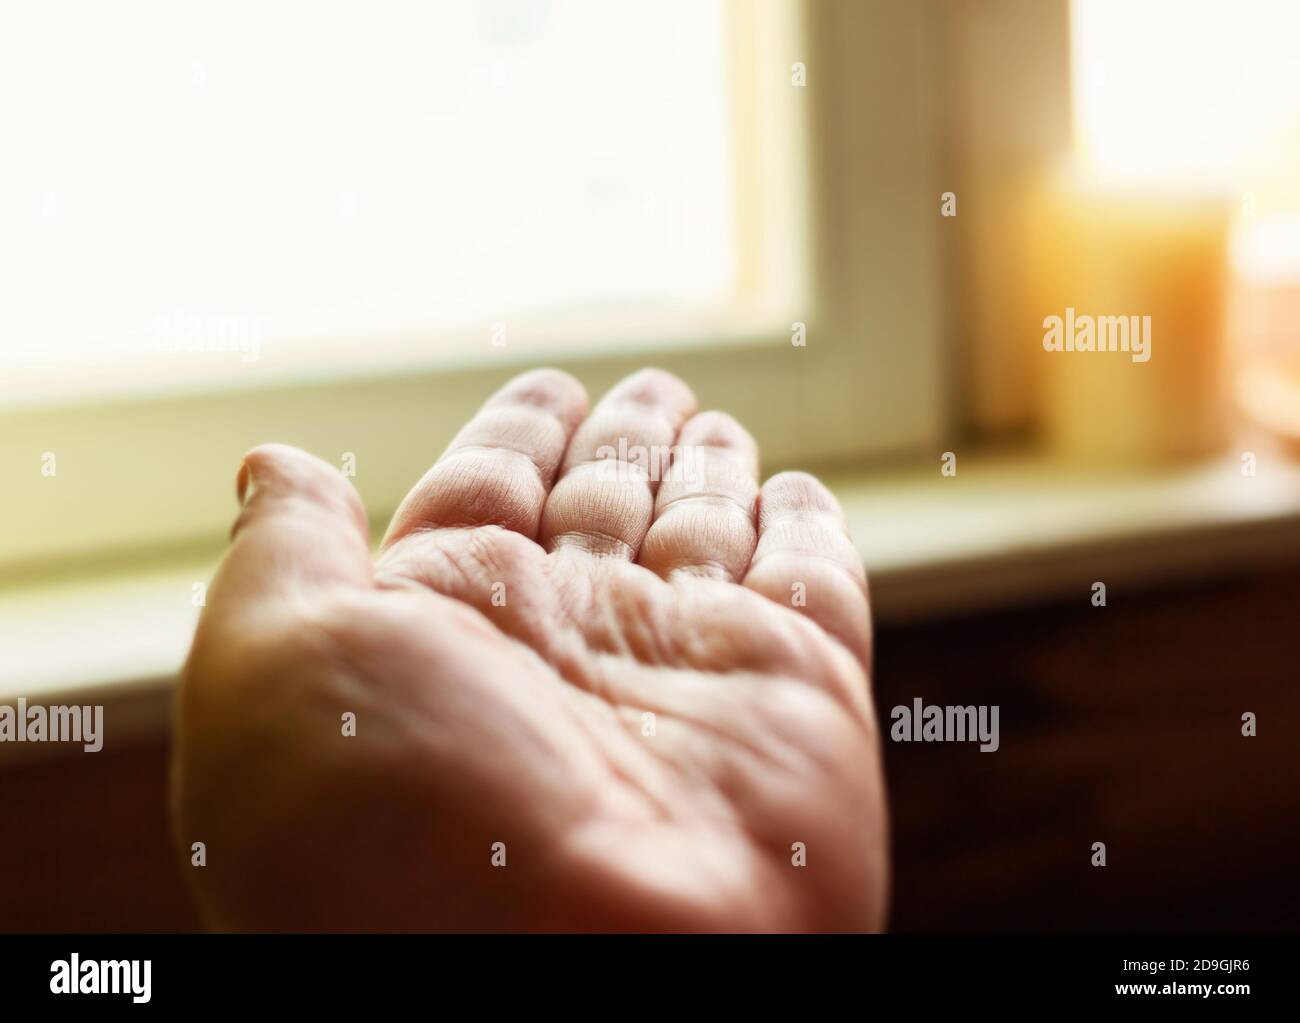 Open human hand is turned toward window at day Stock Photo